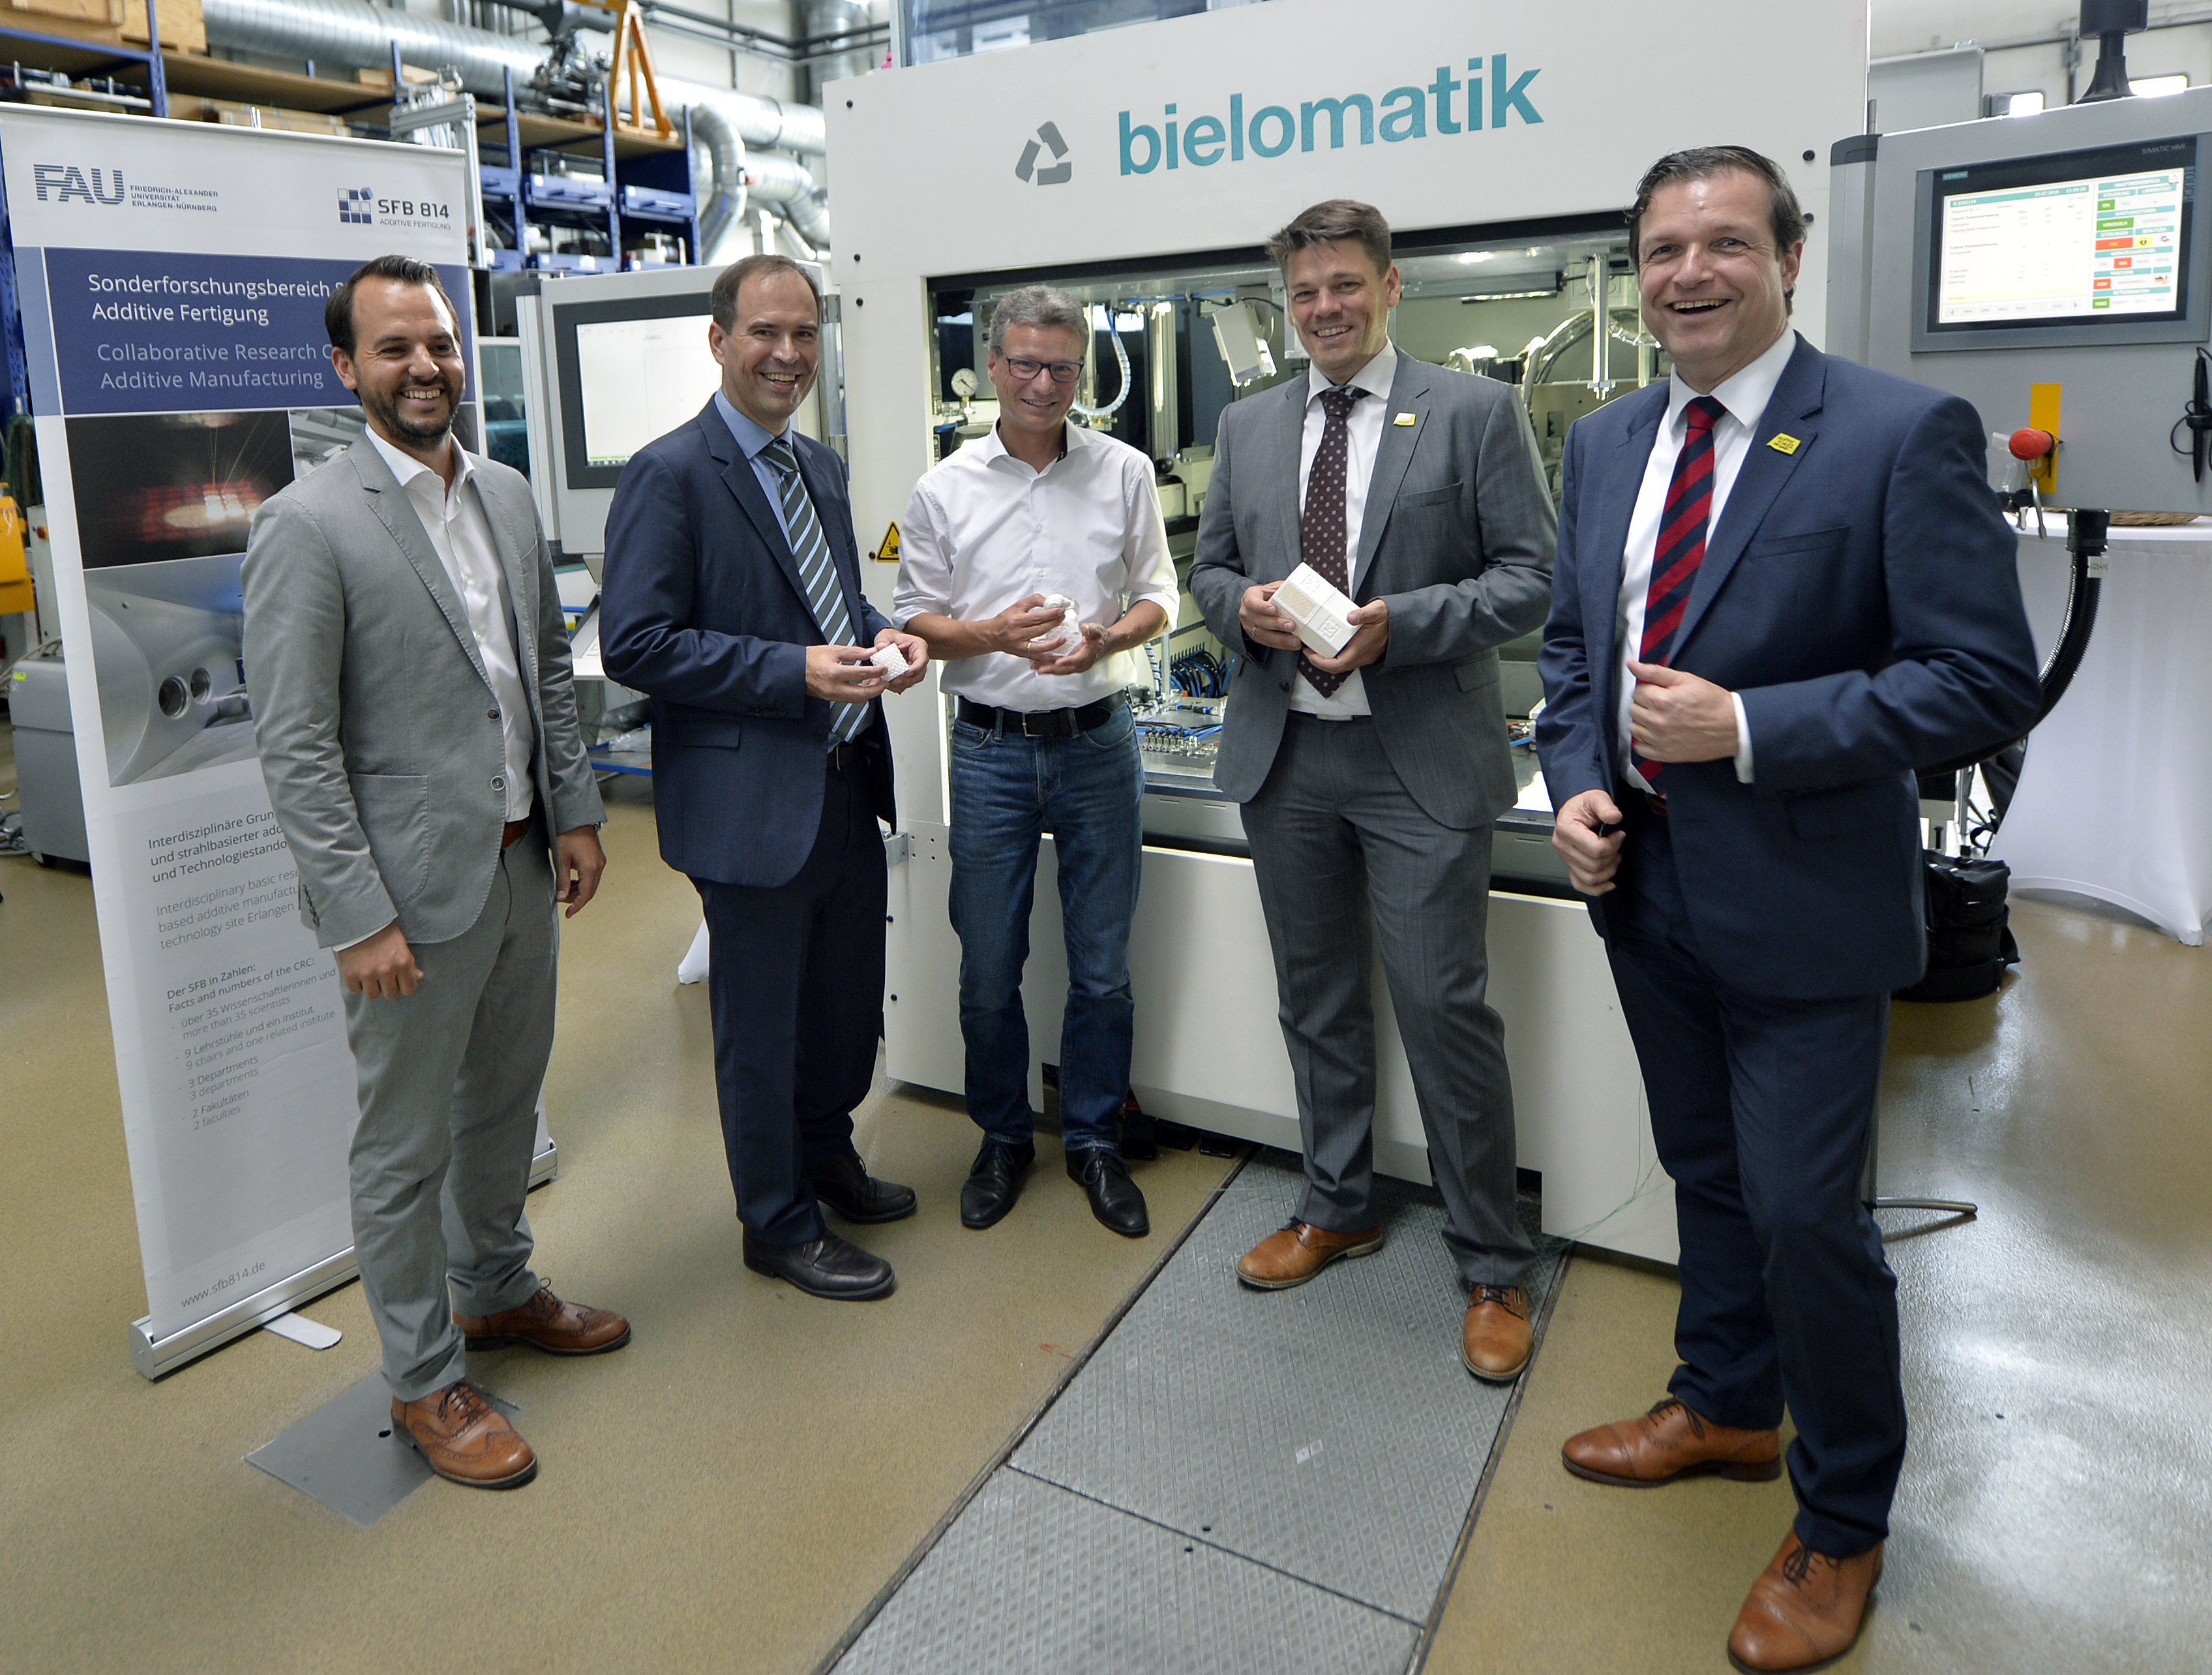 Partners of the FAB-Weld project, from left: Christian Wiesner (FIT Additive Manufacturing Group), Tobias Beiss und Juergen Lochner (bielomatik), Prof. Dr.-Ing. Dietmar Drummer (FAU/LKT), Bavarian Minister of Science Bernd Sibler, Prof. Dr. Arndt Bode and Joachim Hornegger (Bavarian Research Foundation). Photo via FAU/Harald Sippel)